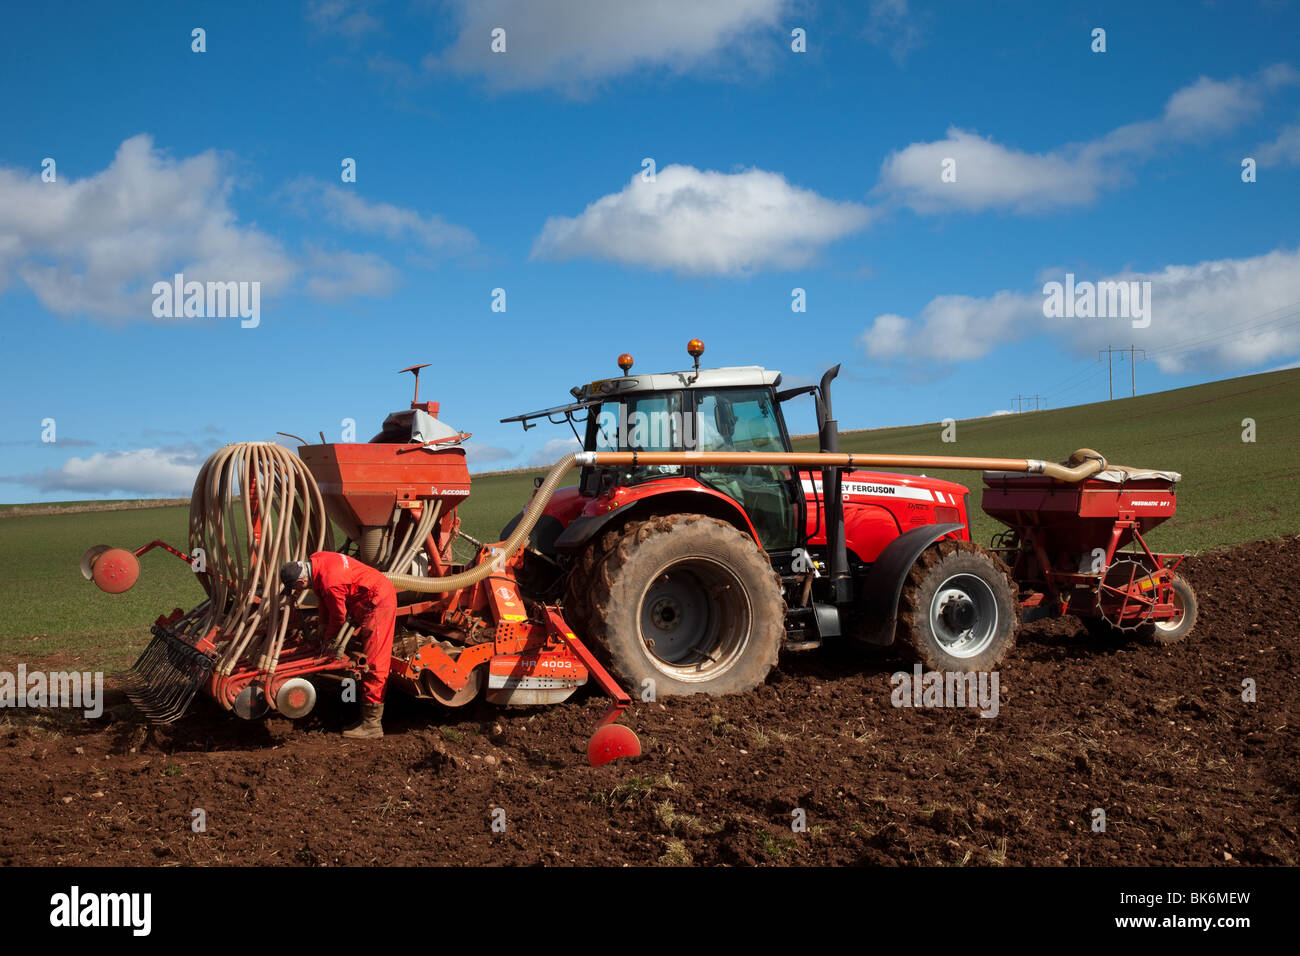 Grain sowing machine with attachments Stock Photo by ©alho007